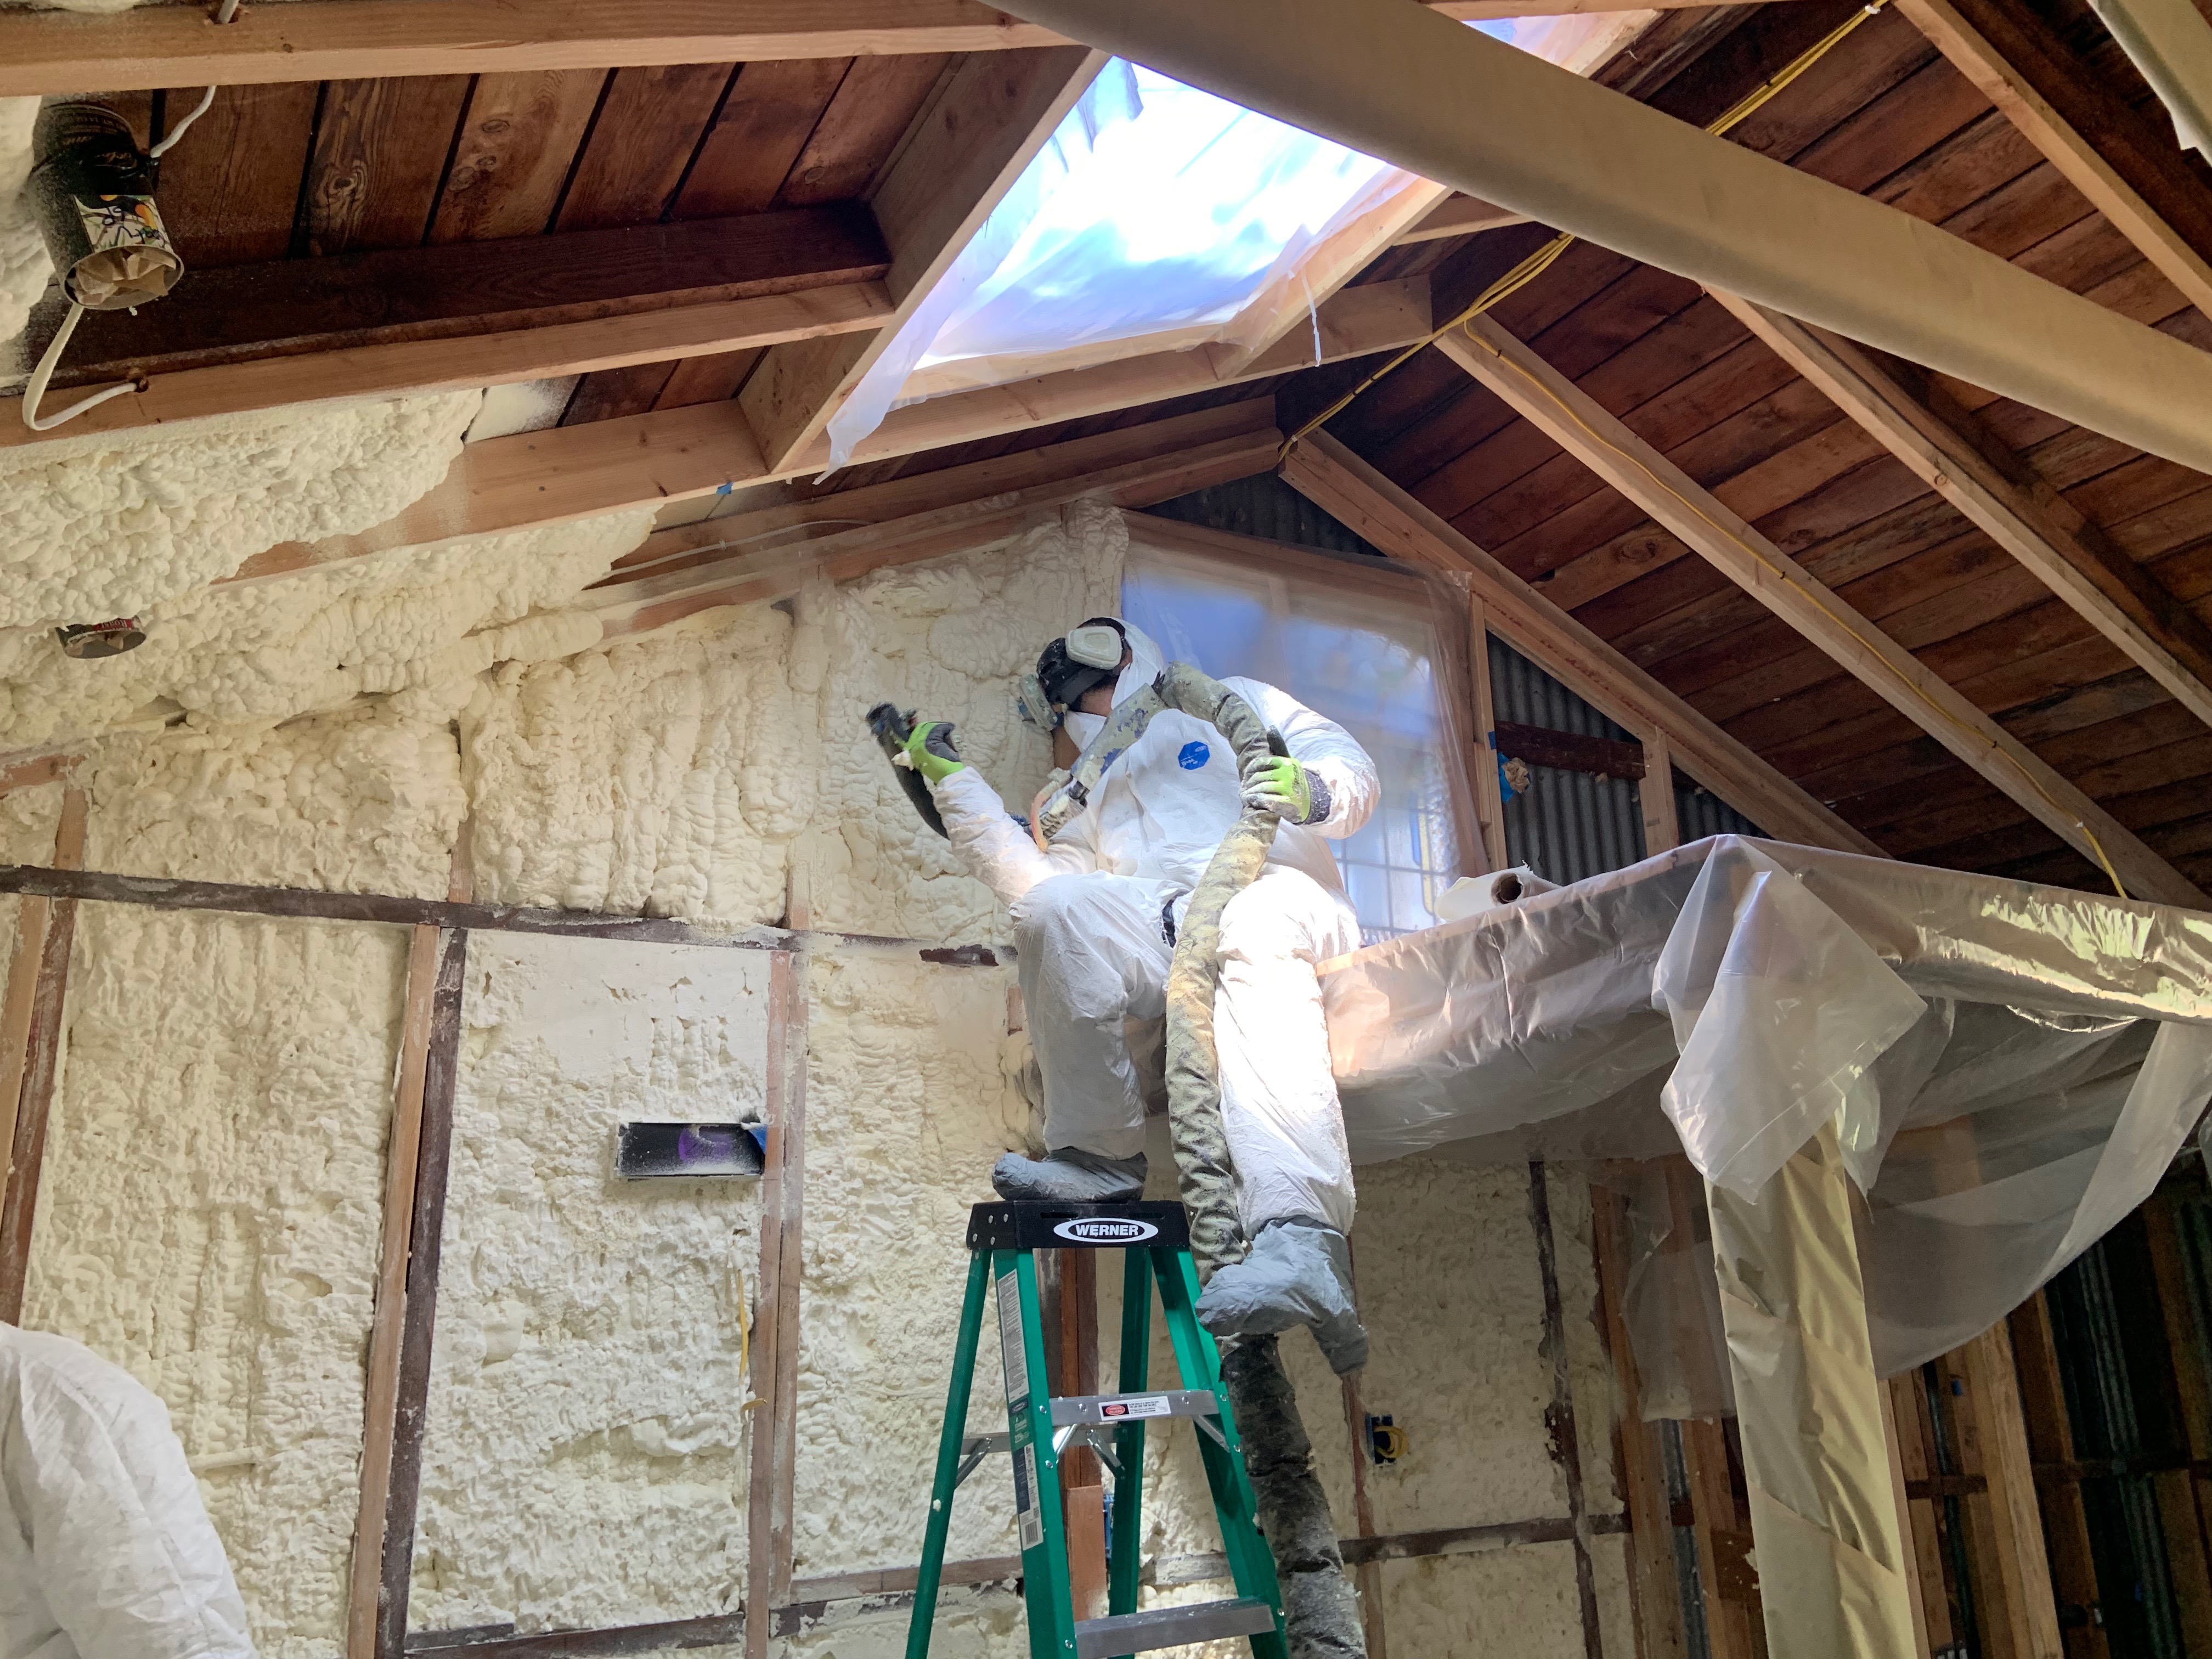 Spray-Foam Insulation (Closed Cell and Open Cell)